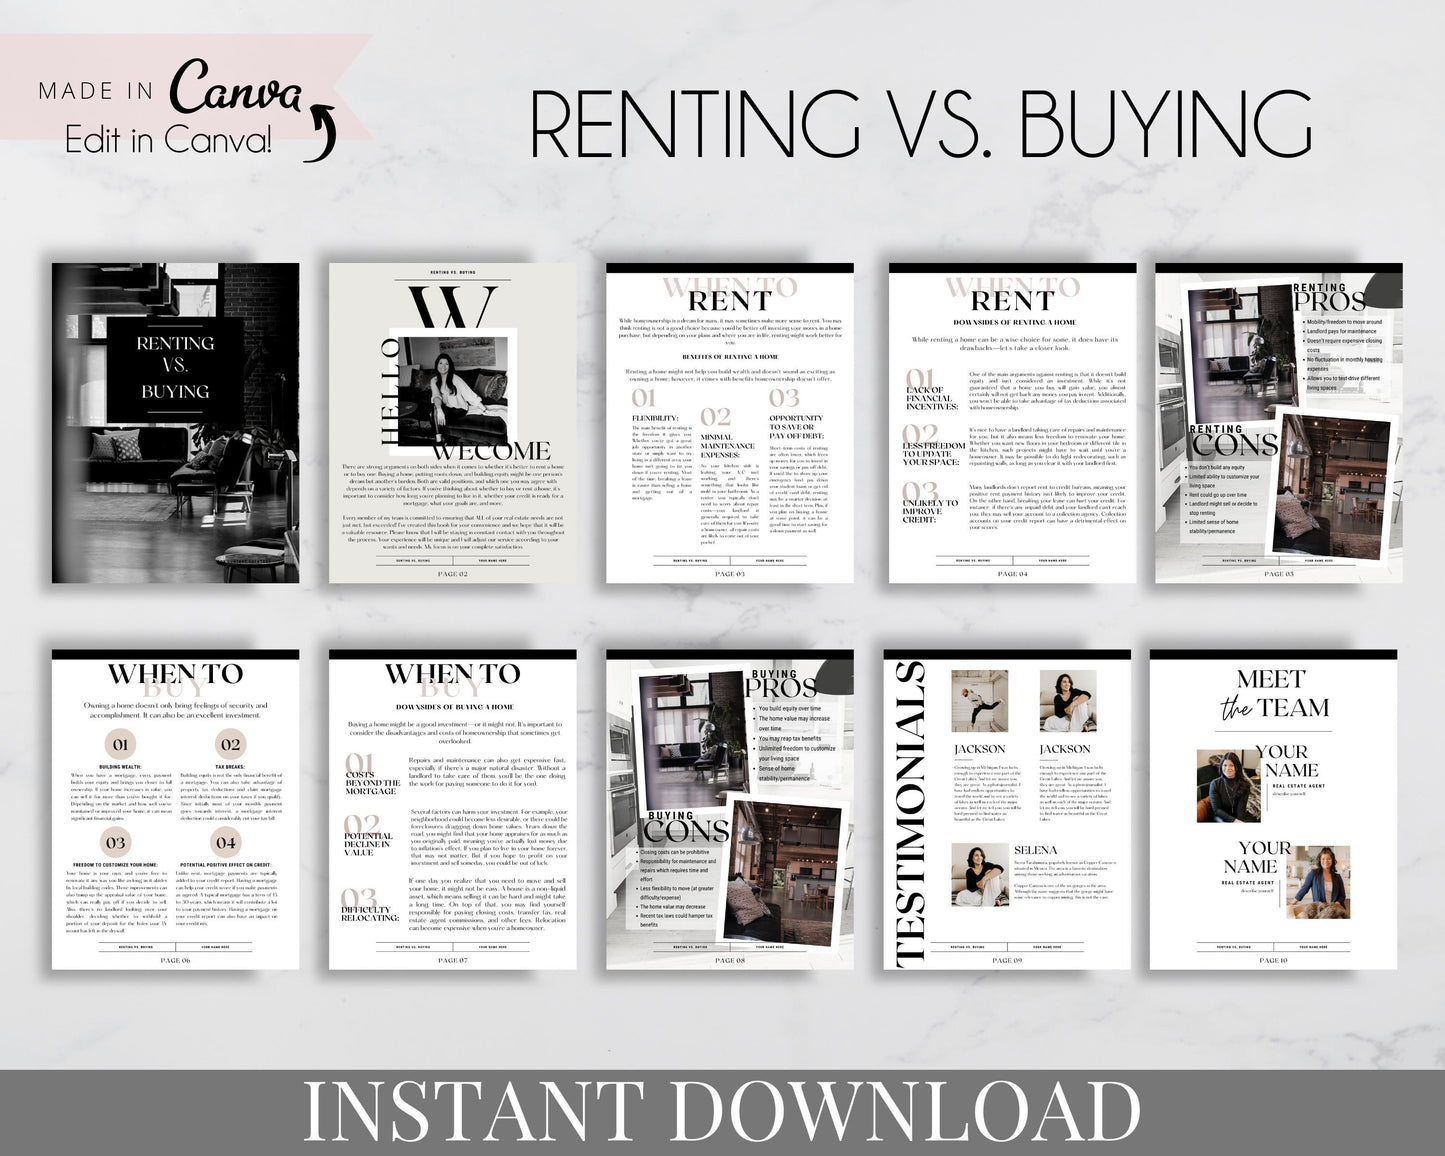 Renting vs. Buying Instant Download for Print or Digital - Real Estate Agent, Realtor Template - 10 page preview